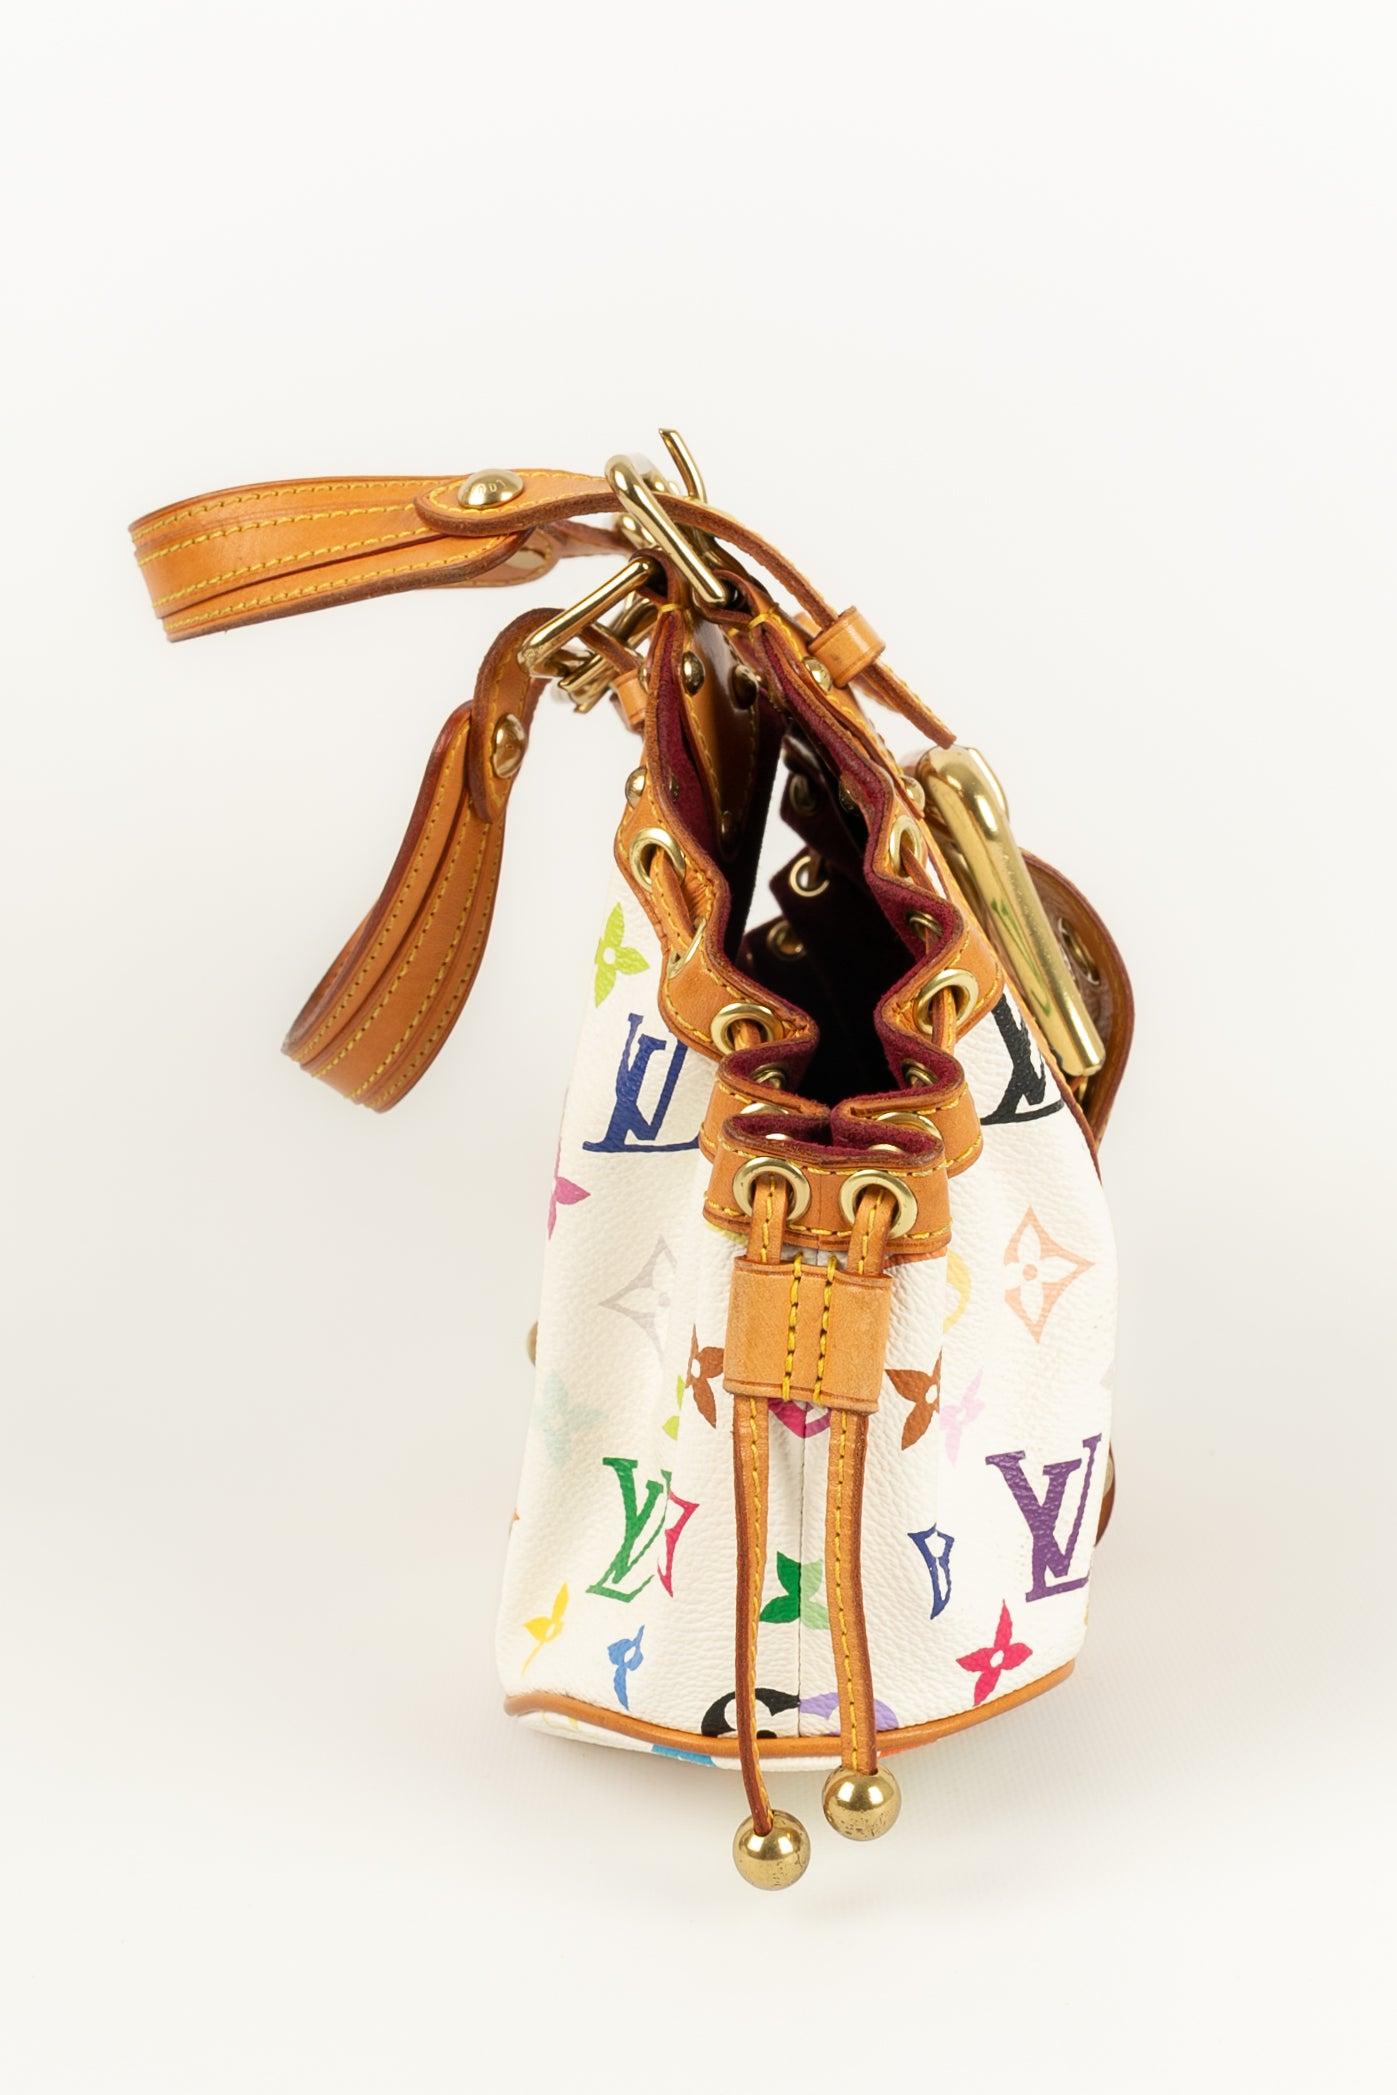 Louis Vuitton x Murakami Limited Edition Monogram Multicolor Sologne Bag,  2003 at 1stDibs